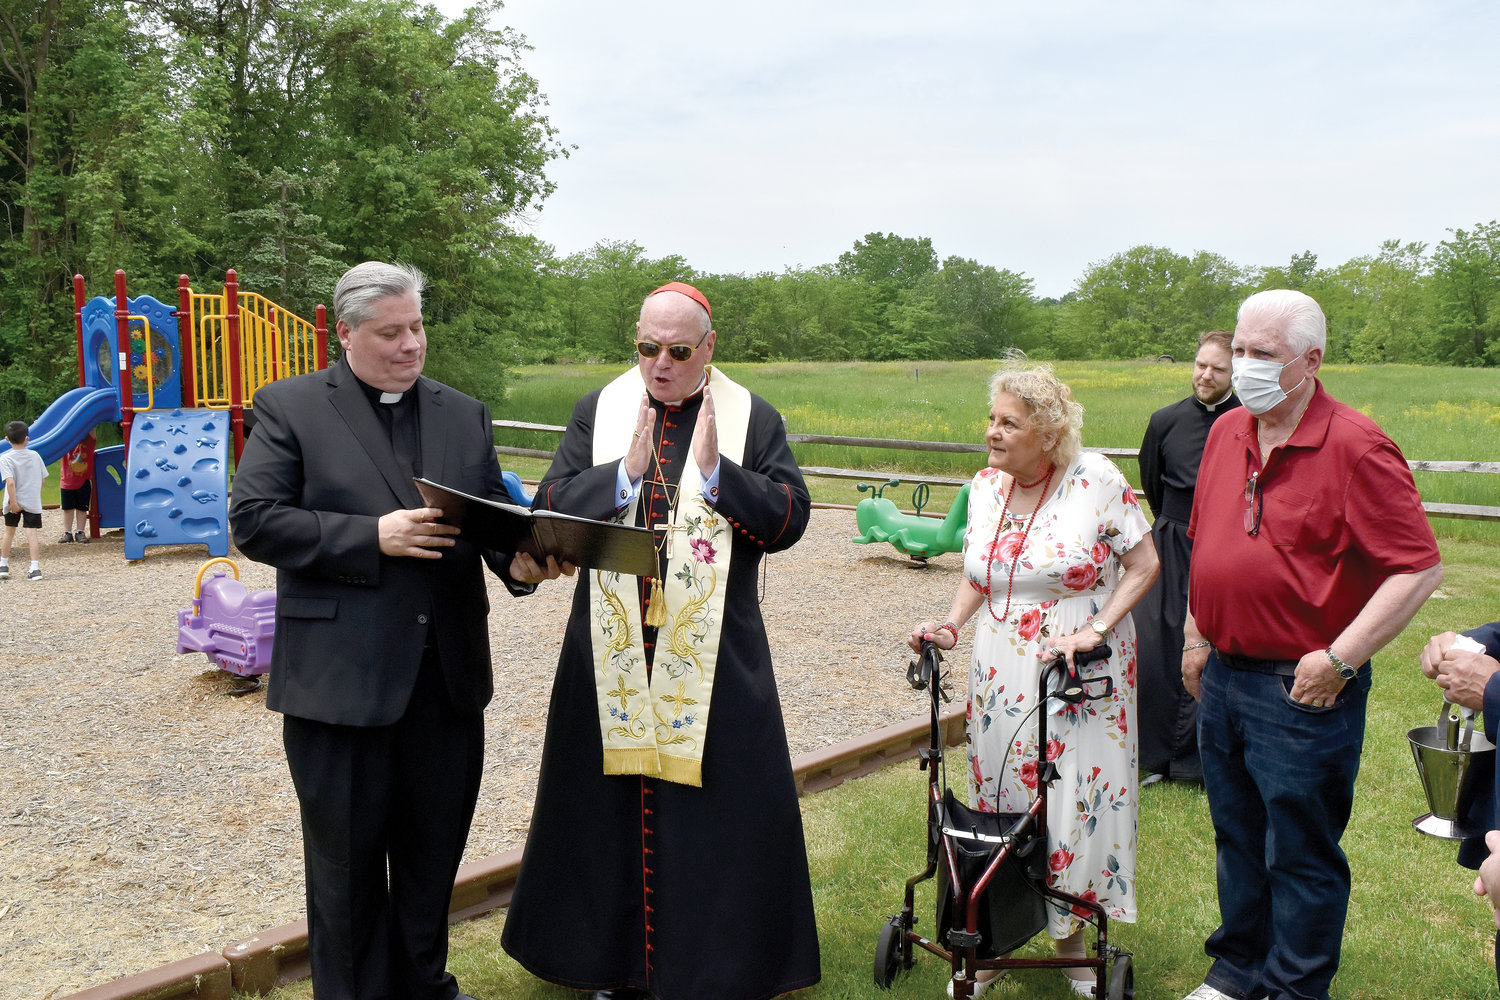 The new bishop joins Cardinal Dolan for the blessing of the Faith First Early Childhood Program playground at St. Columba’s parish in Chester last May.